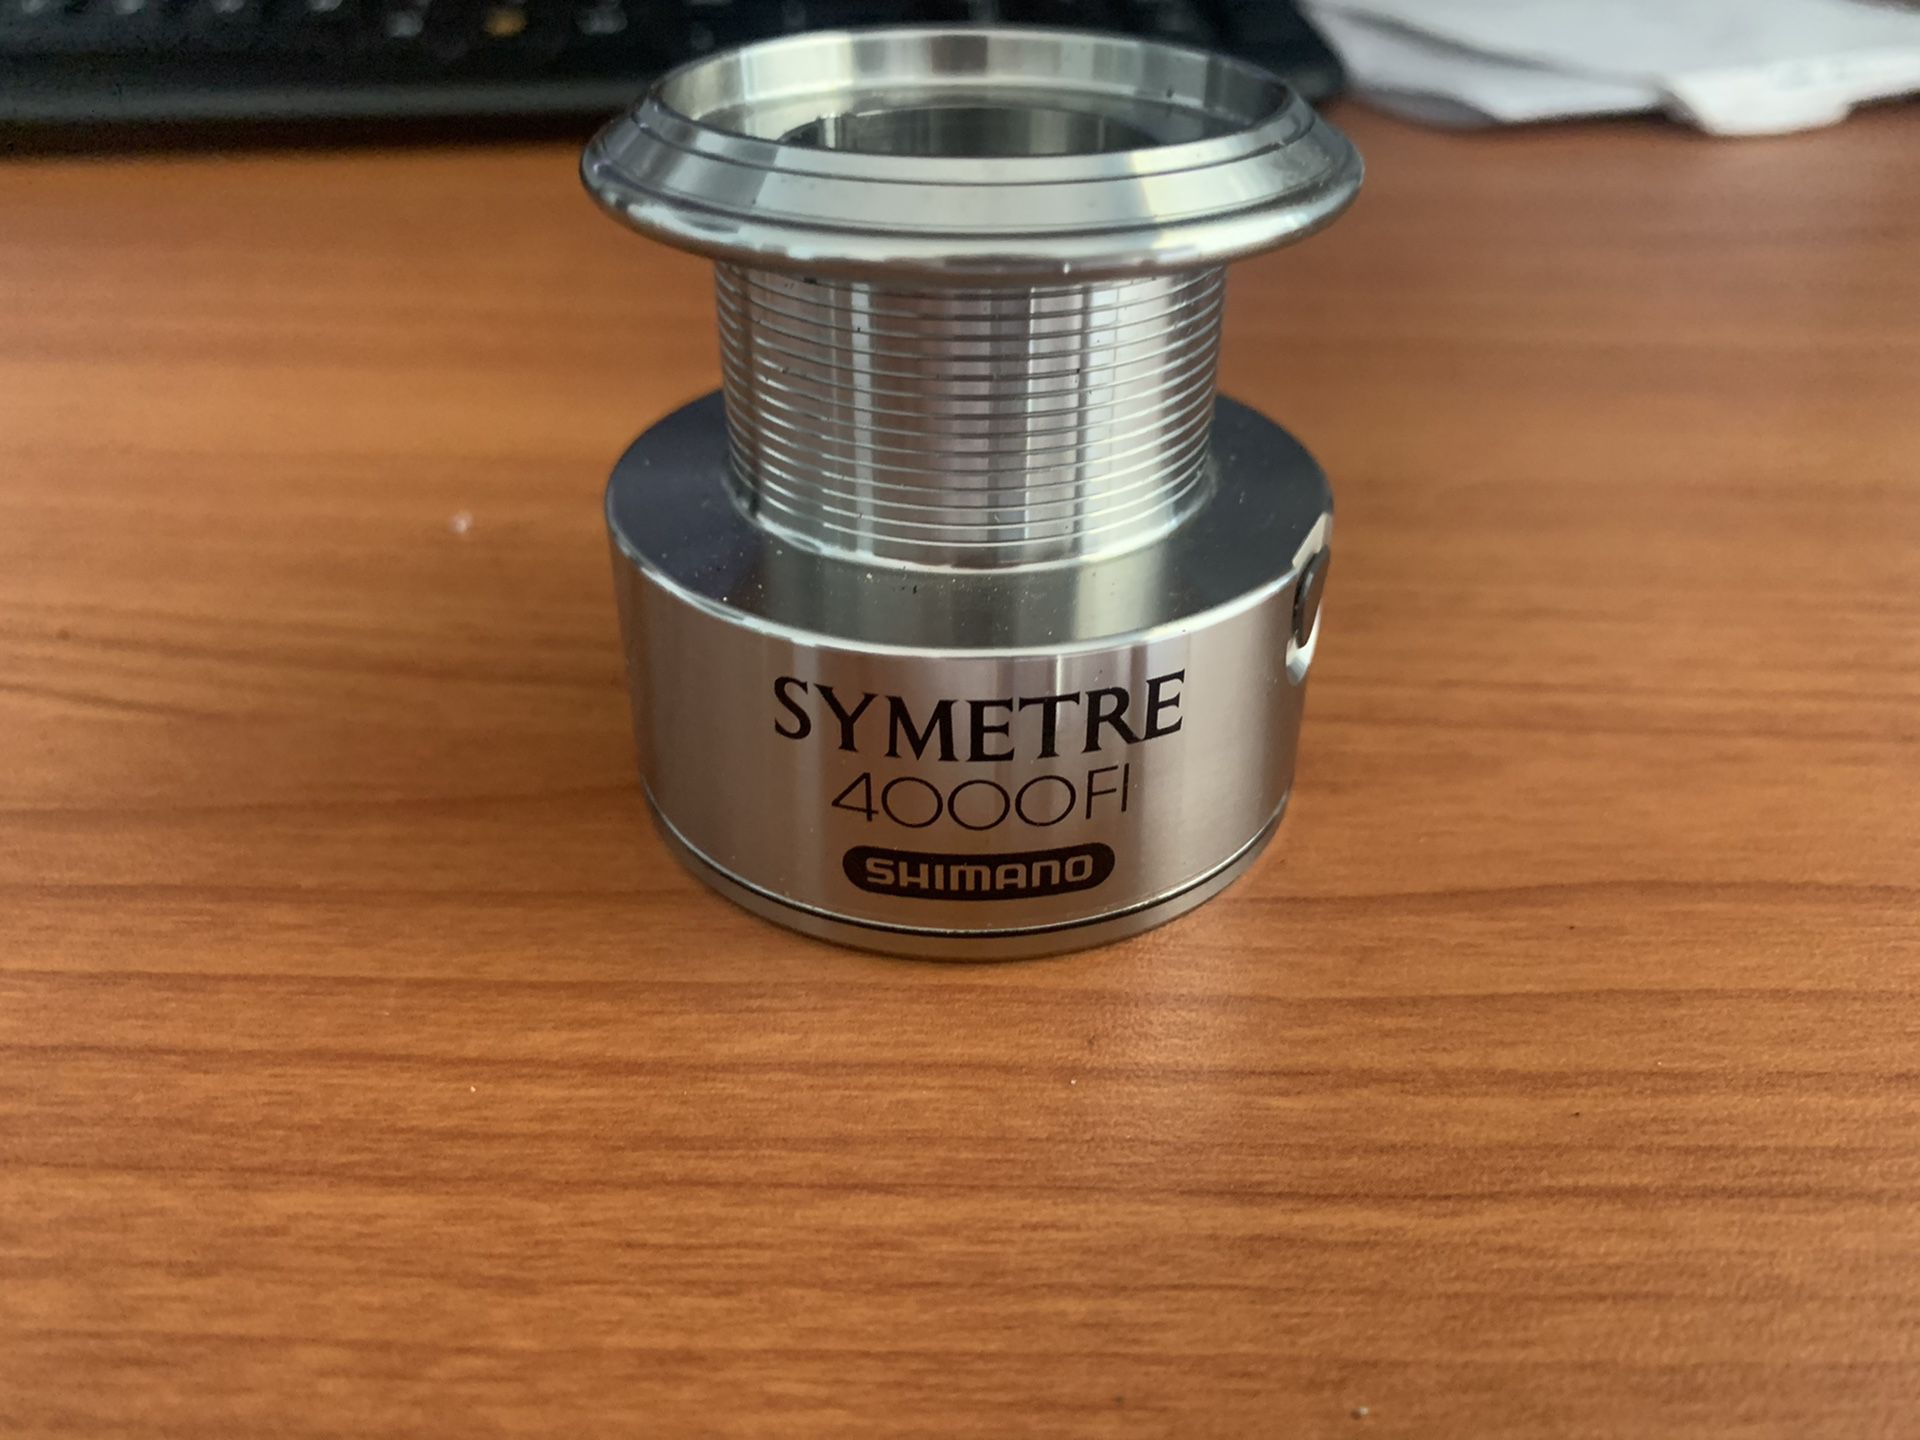 Shimano Symetre 4000FI spare spool for Sale in Lake Worth, FL - OfferUp